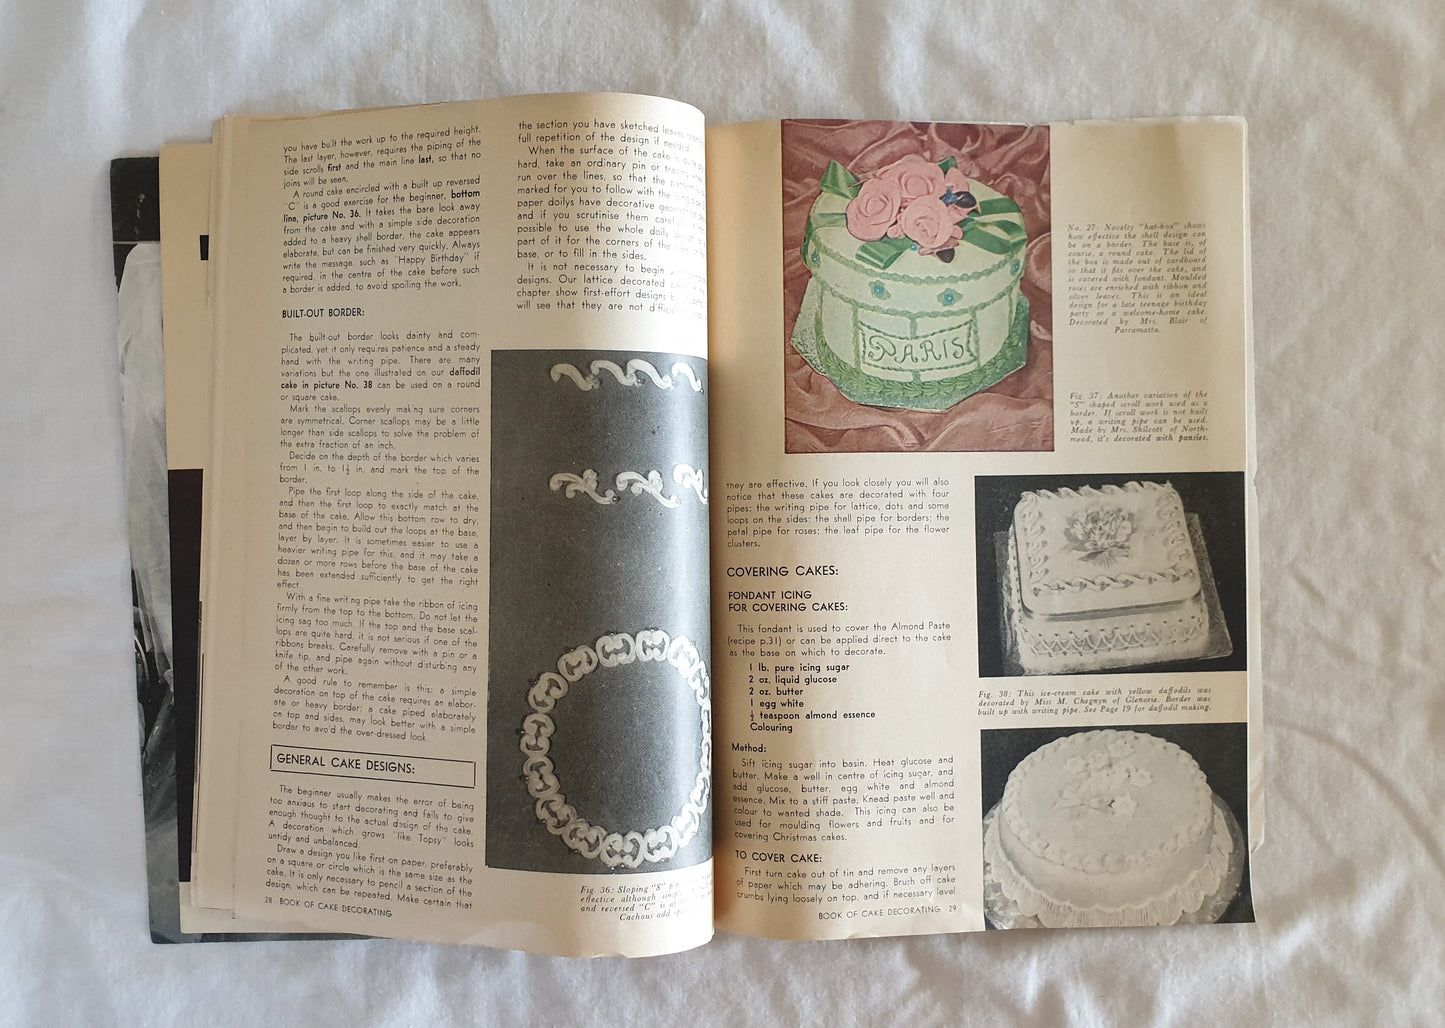 Del Cartwright's Book of Cake Decorating by Australian House and Garden